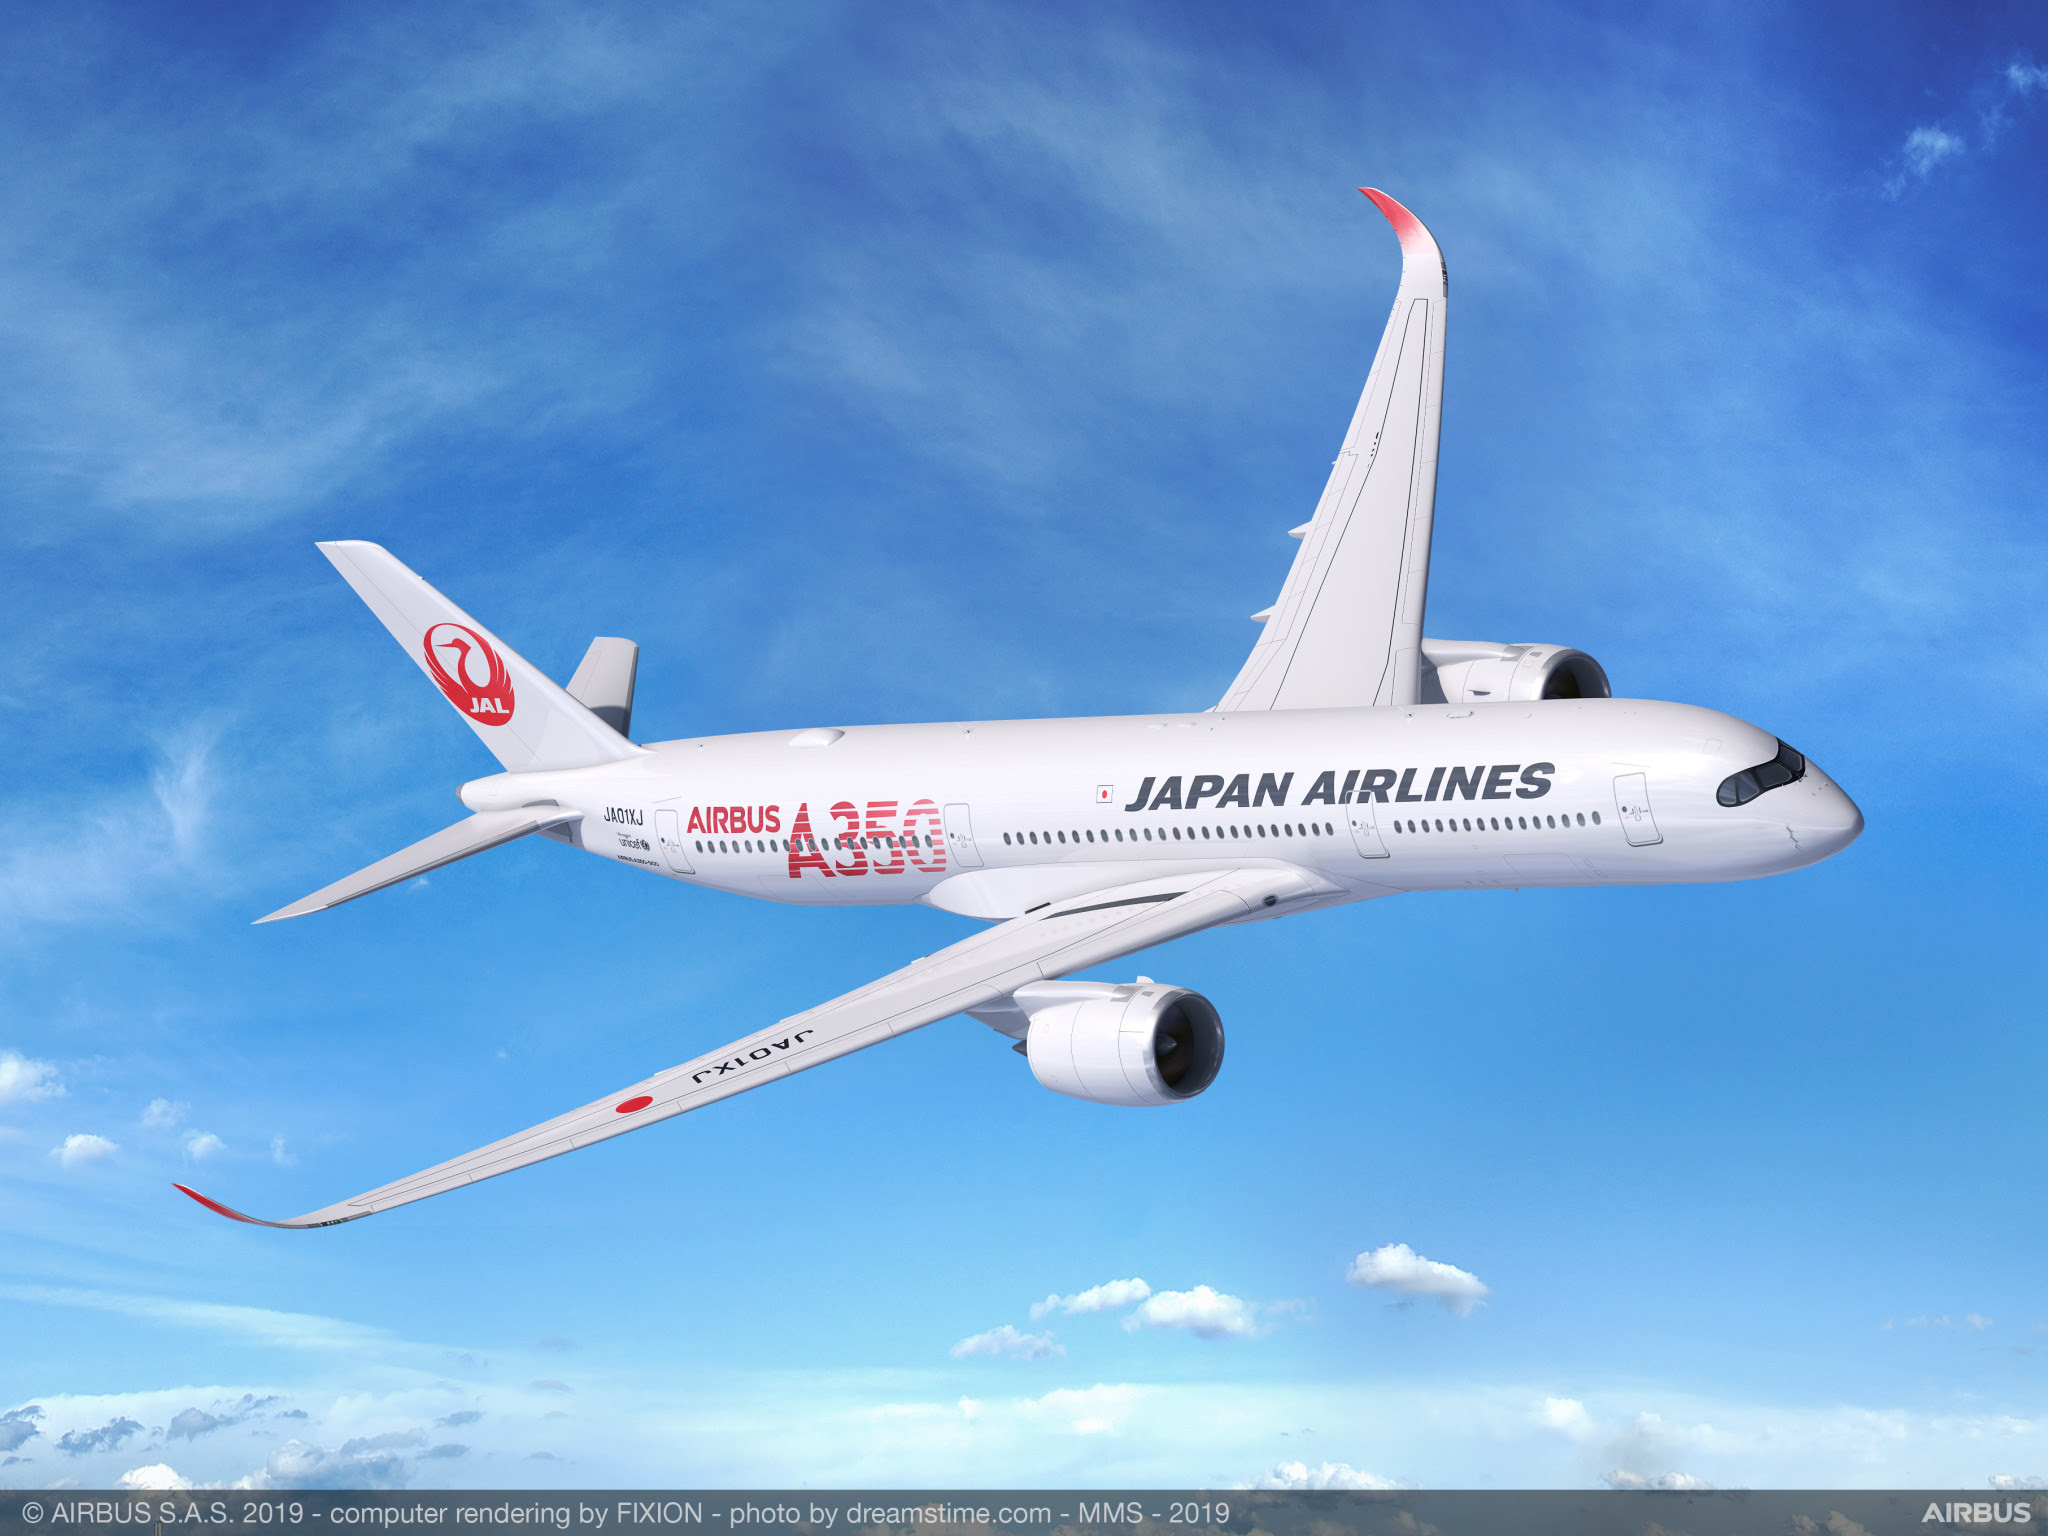 Press Release: Japan Airlines selects Spafax as new IFE partner GirlRunway Girl